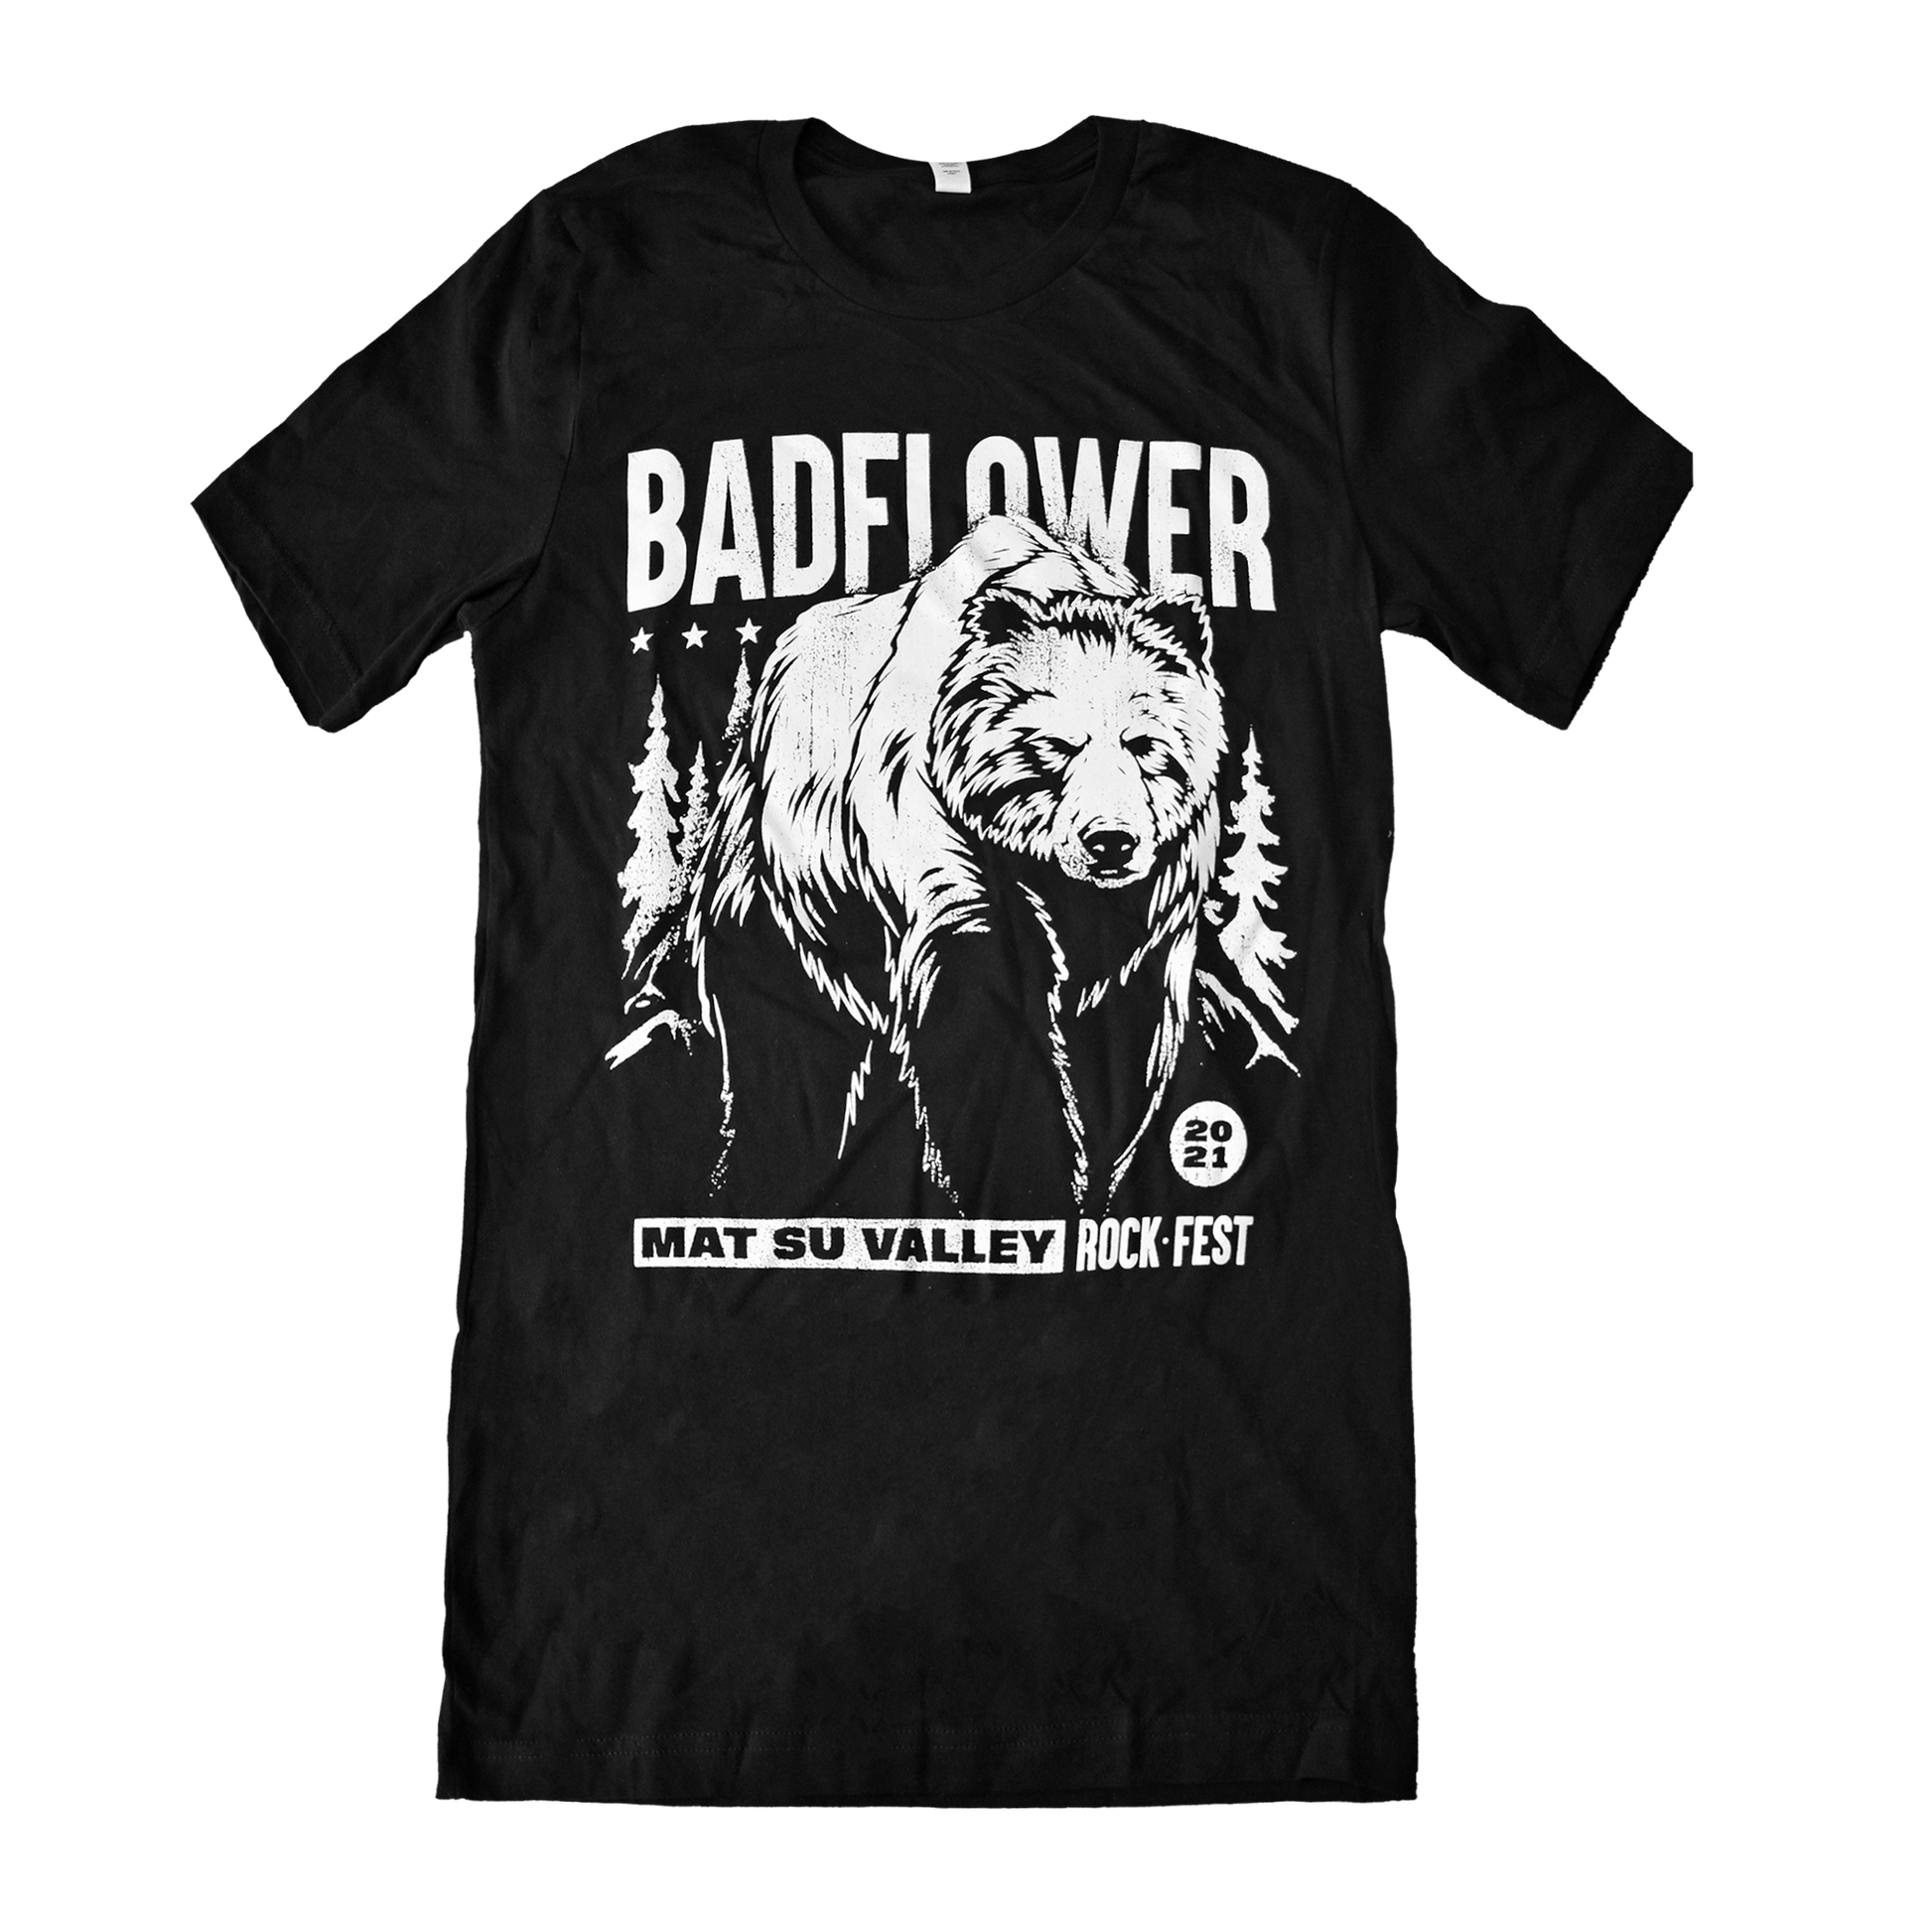 Black short sleeve tee shirt with white graphic of bear surrounded by trees. Badflower in bold white letters above graphic with small stars. Below bear graphic says Mat Su Valley Rock Fest 2021